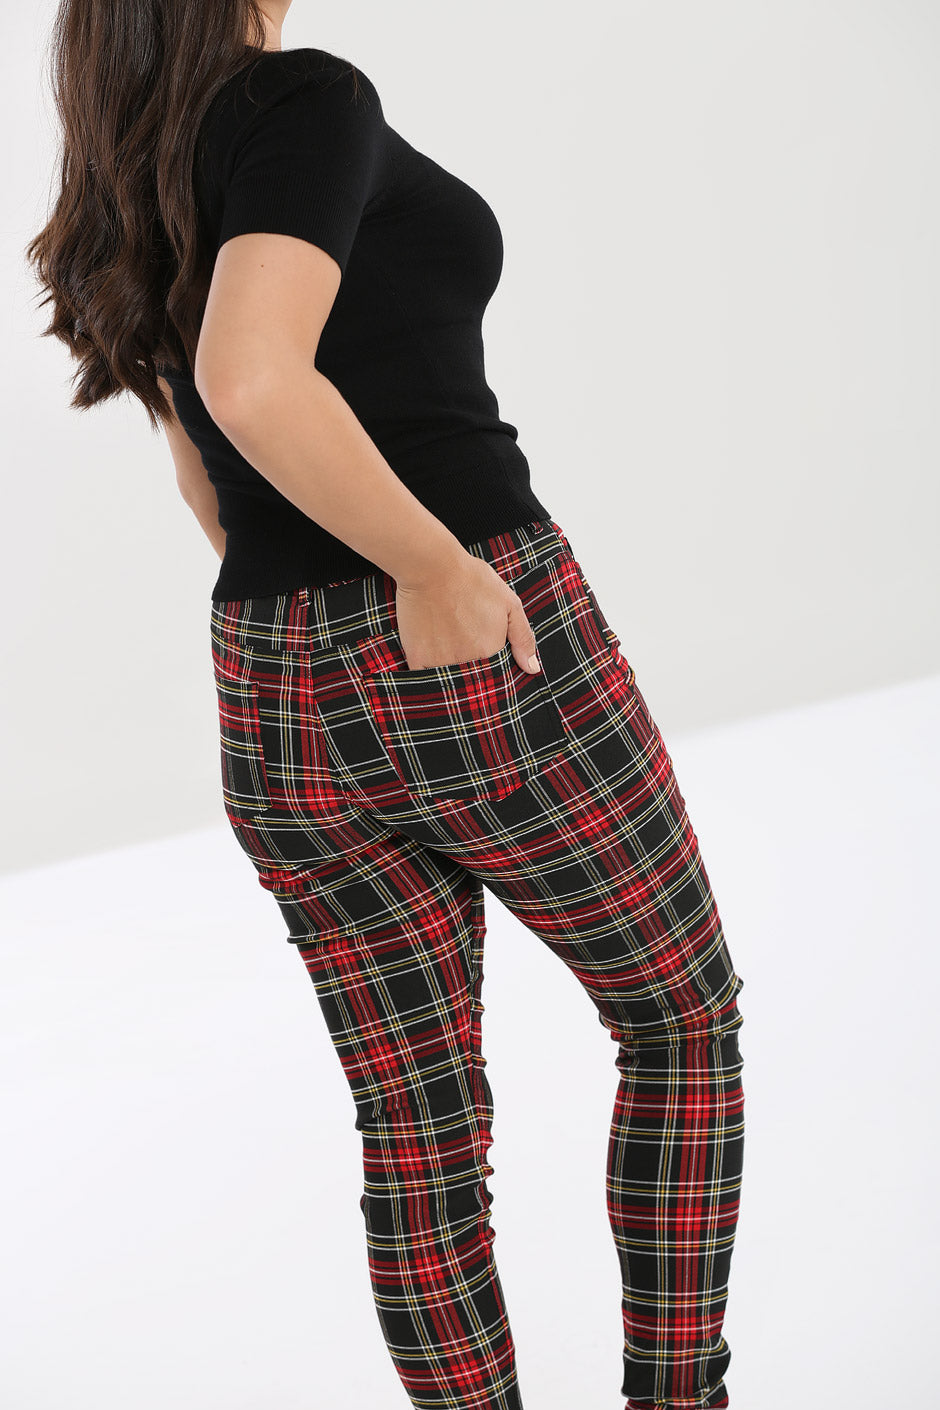 Urban Renewal Remnants Red Tartan Trousers  Urban Outfitters UK